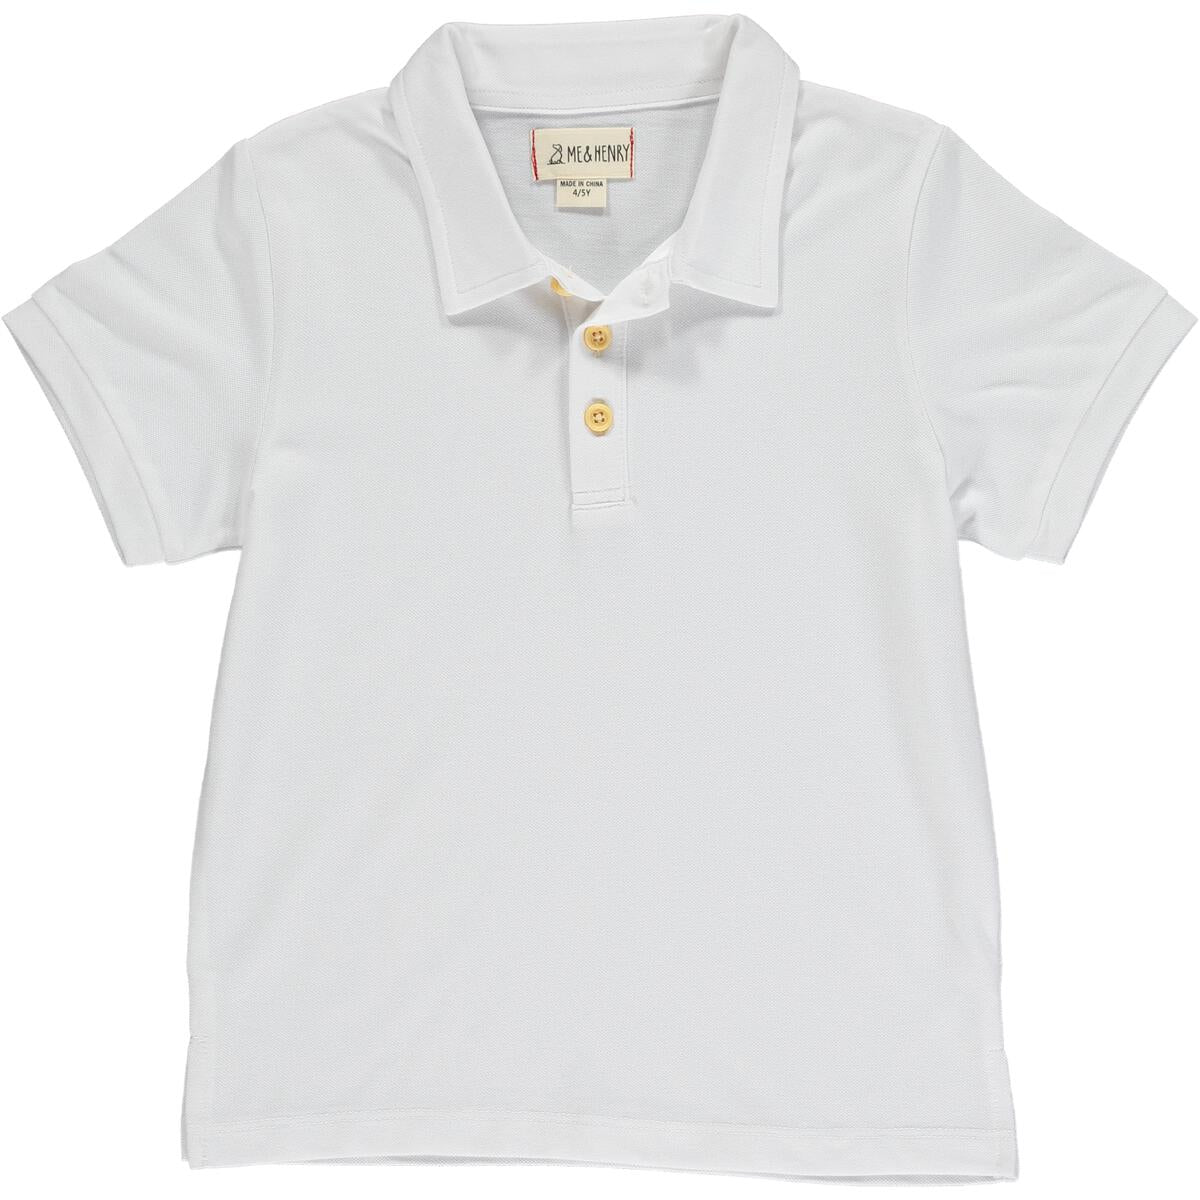 me and Henry, shipping, white, polo, shirt, short sleeve, dressy, toddler, boy, little boy, cotton, spring, summer, fall